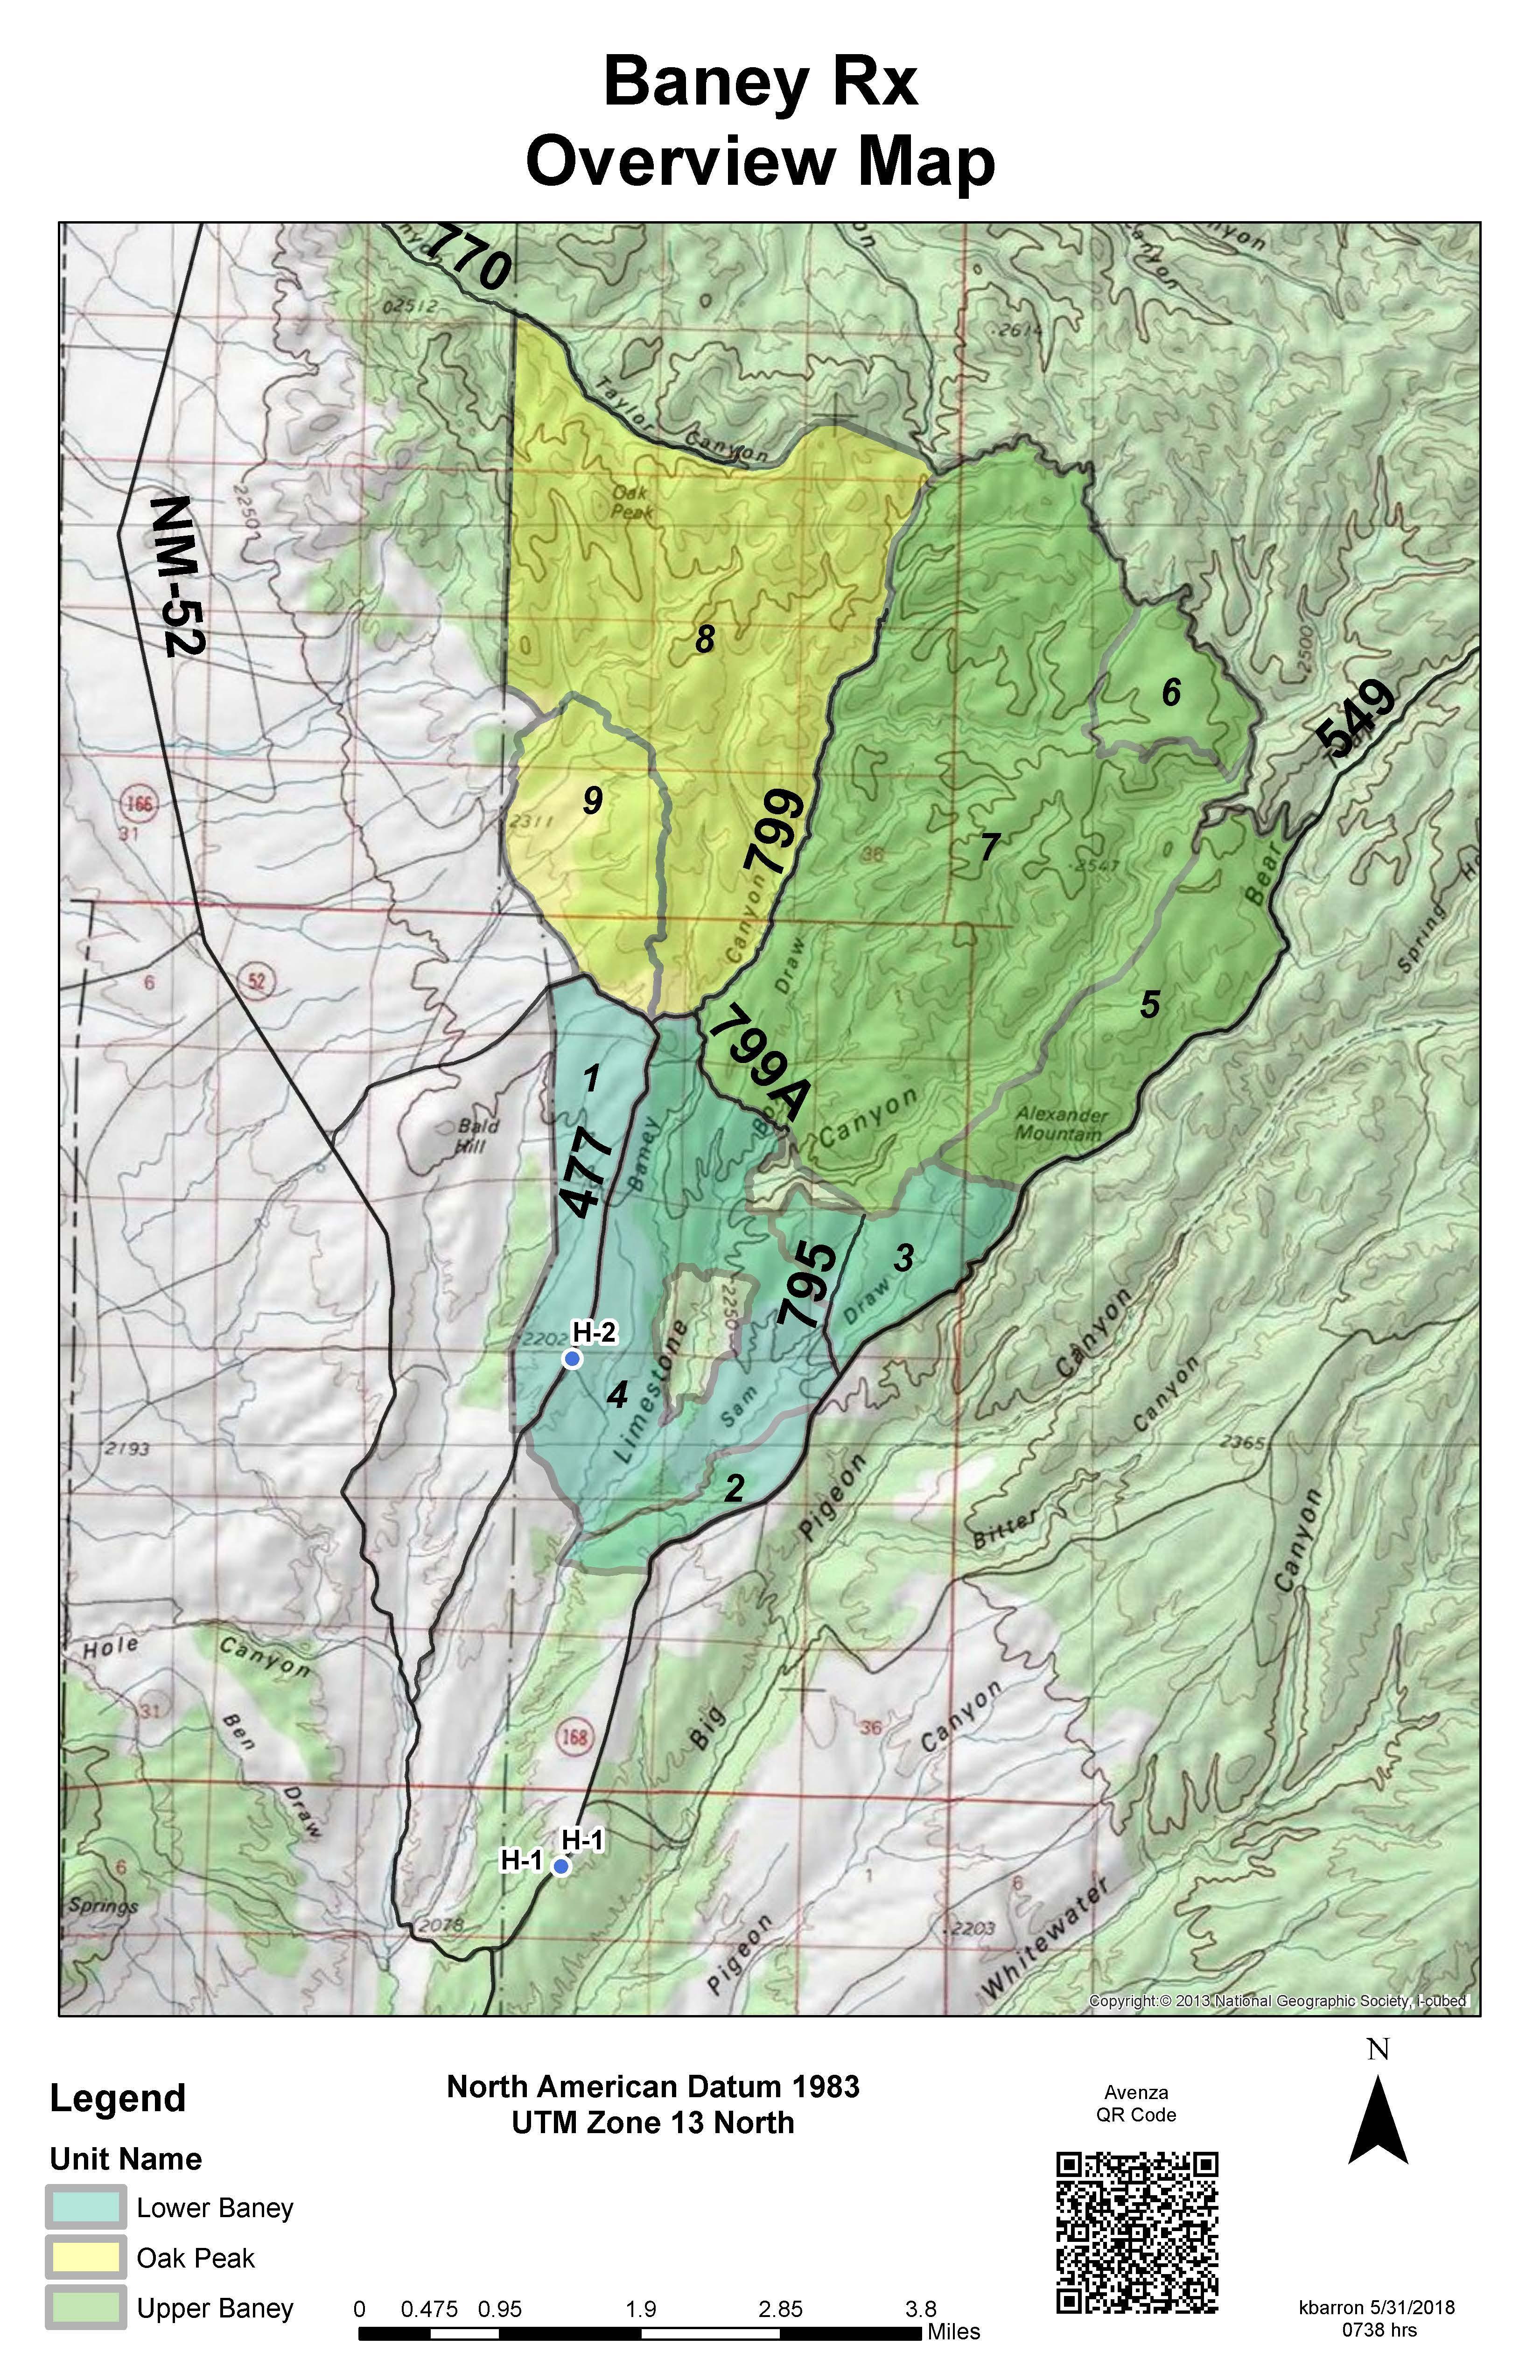 Baney RX Fire Overview Map